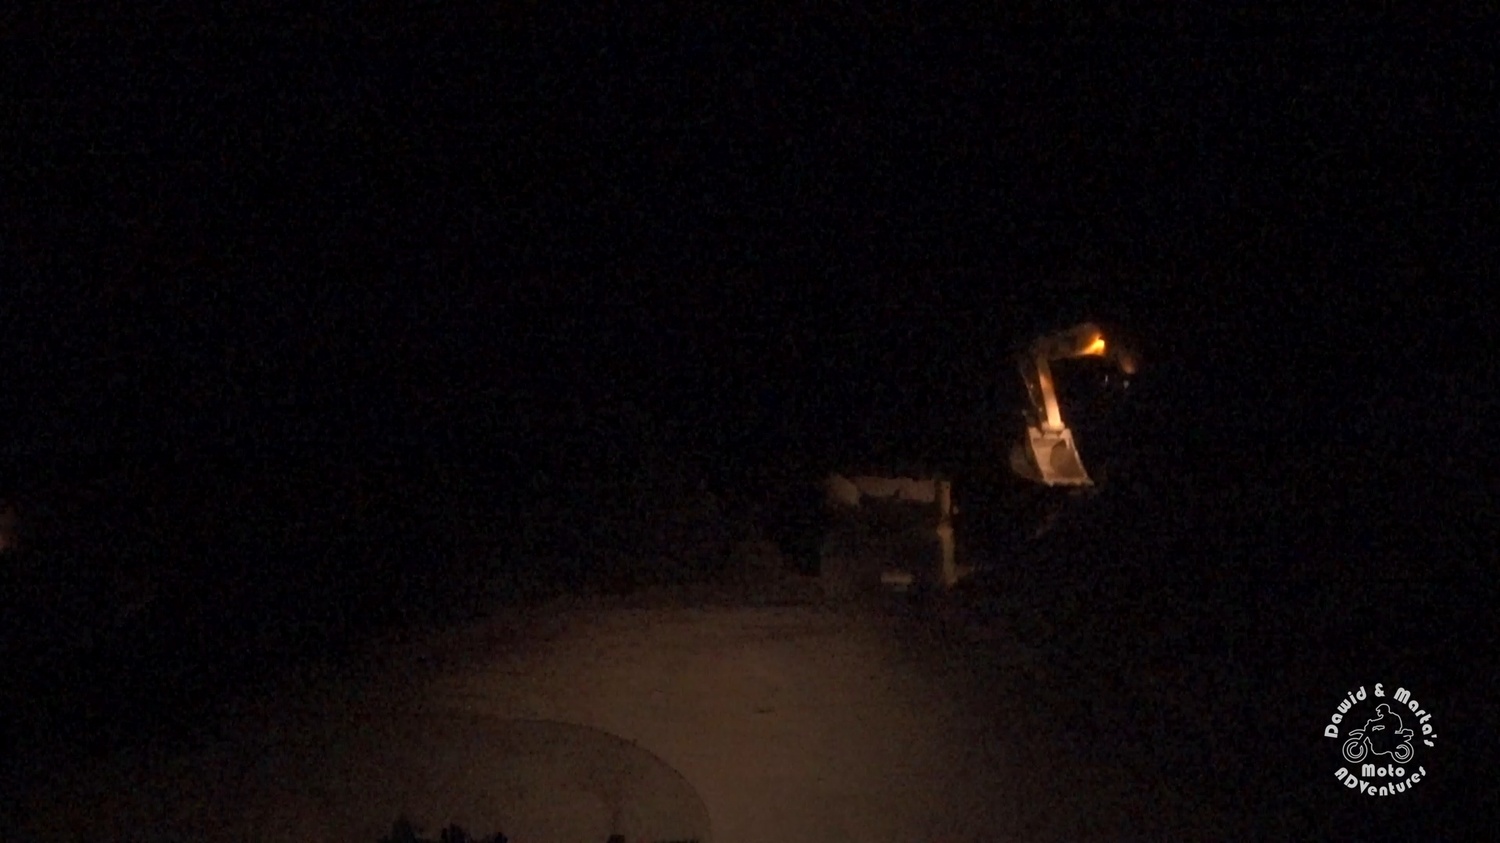 Digger working at night at road to Lovcen National Park